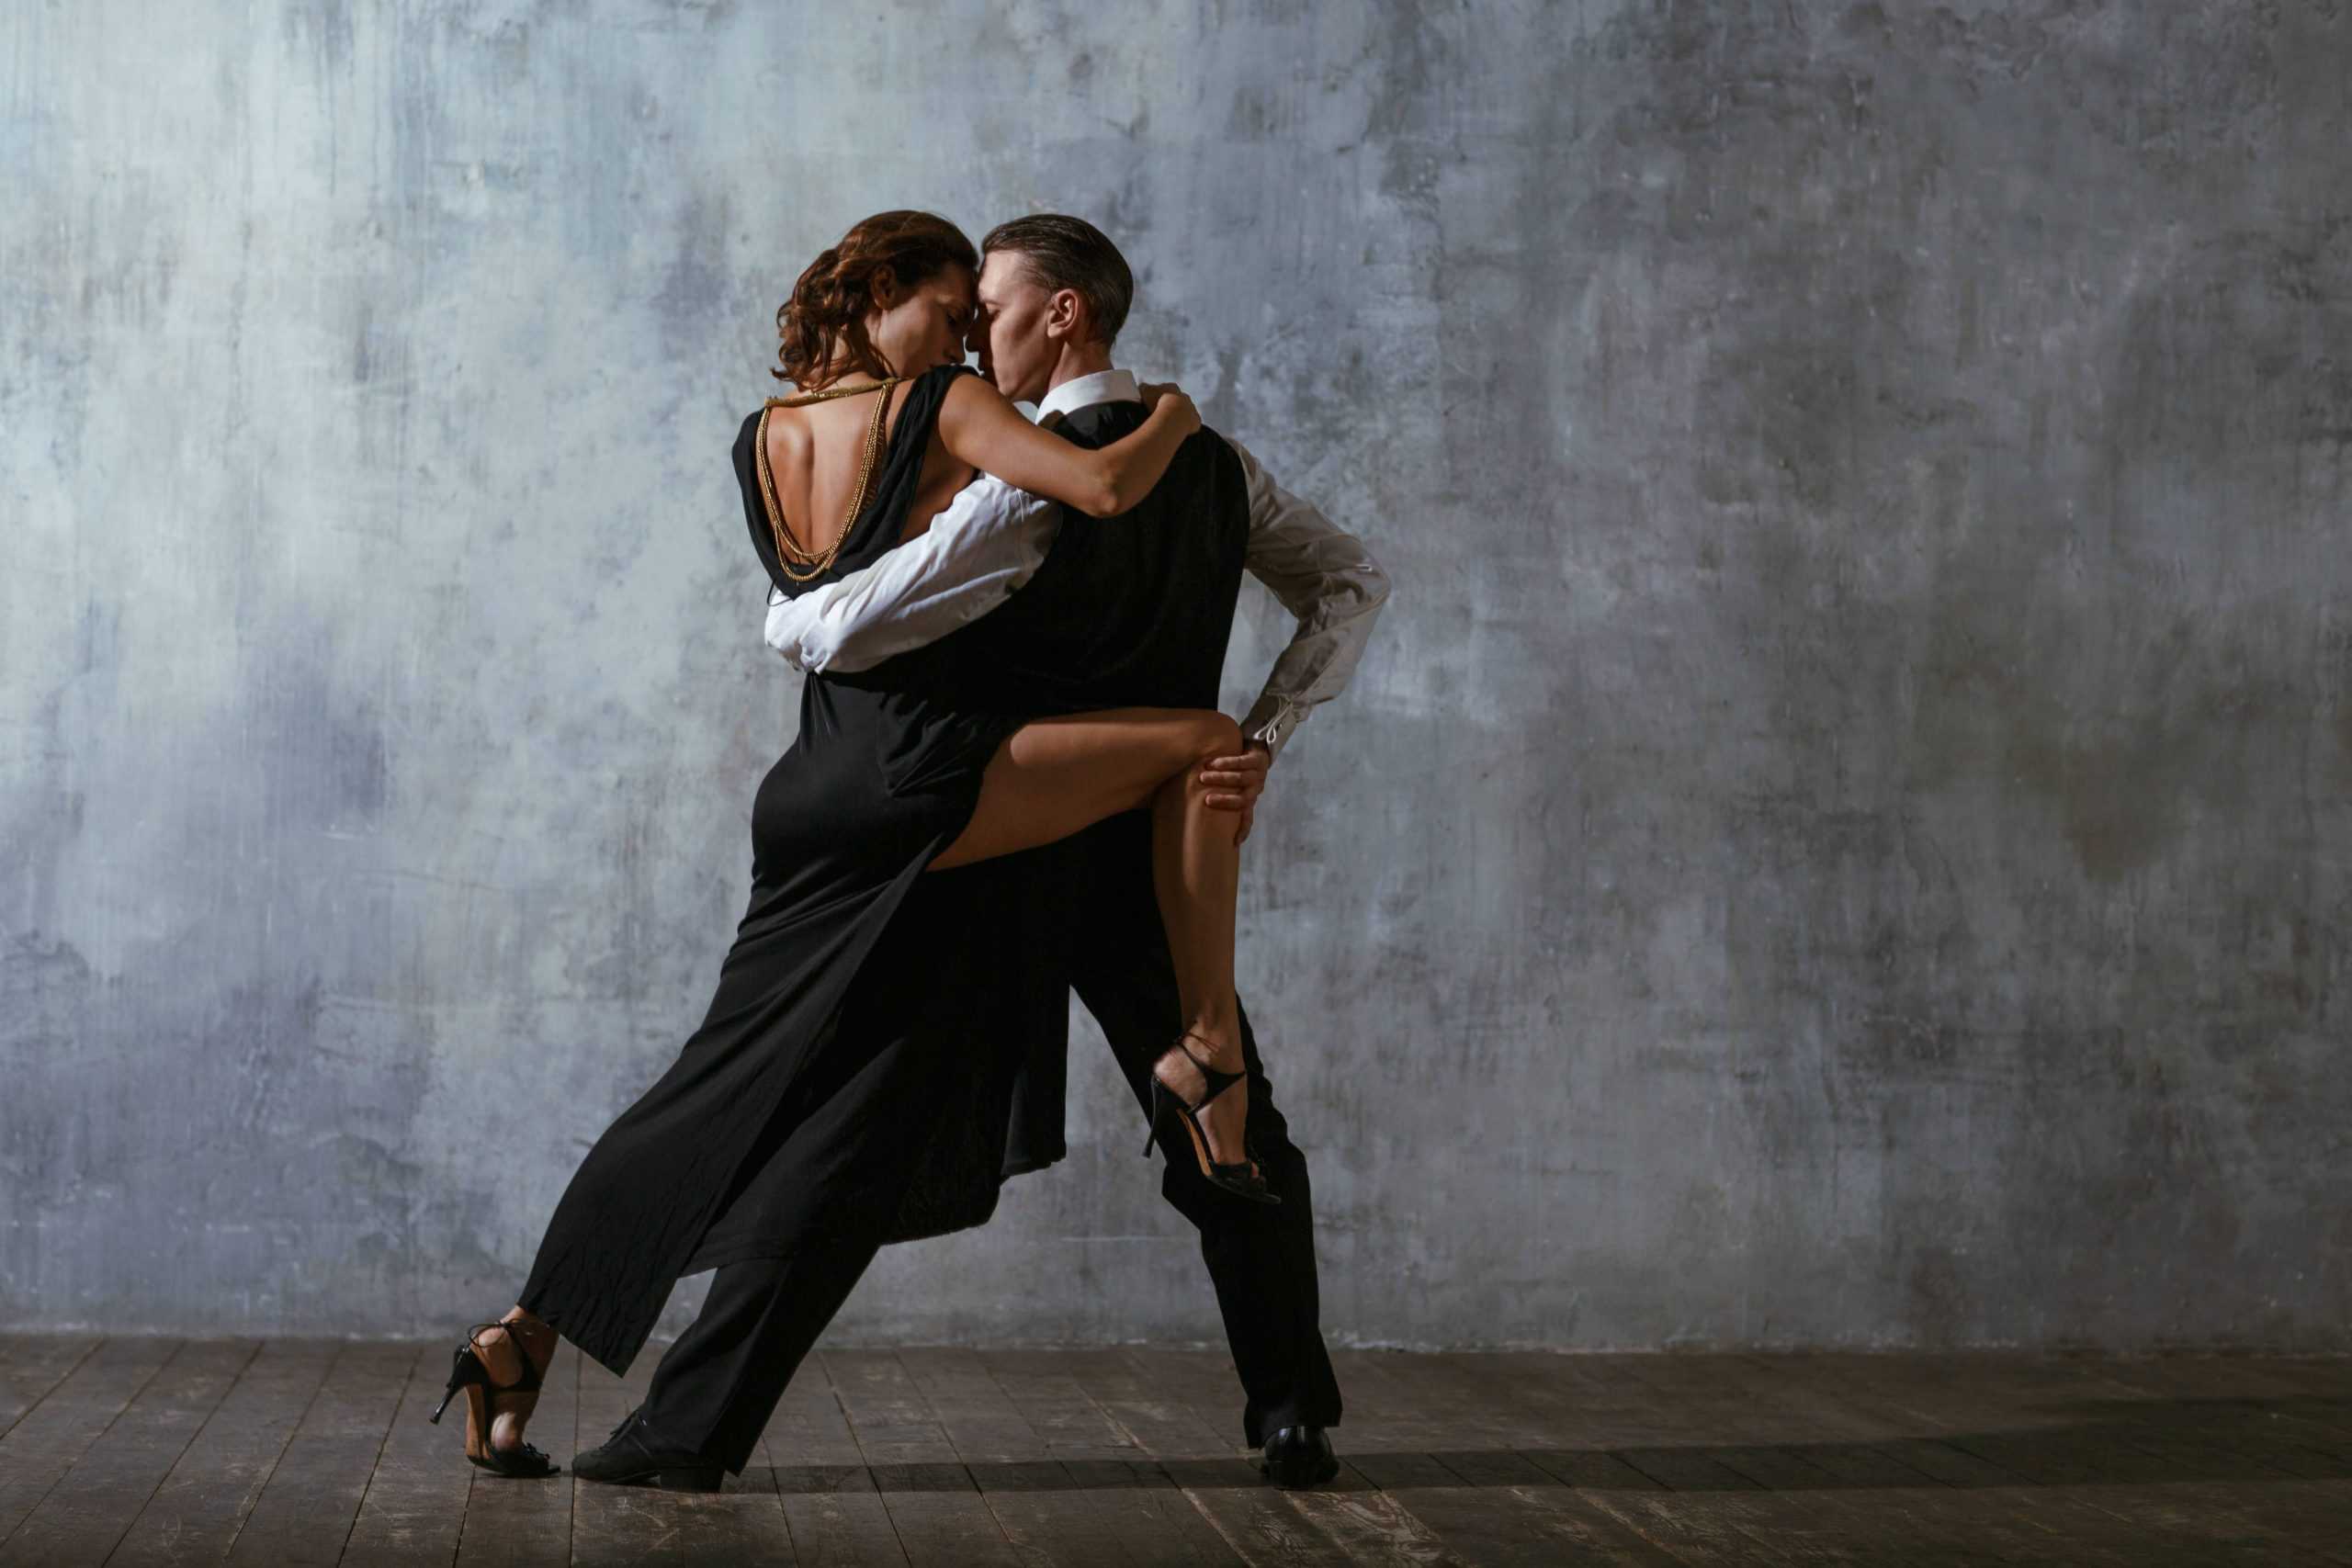 How to find the right dance partner